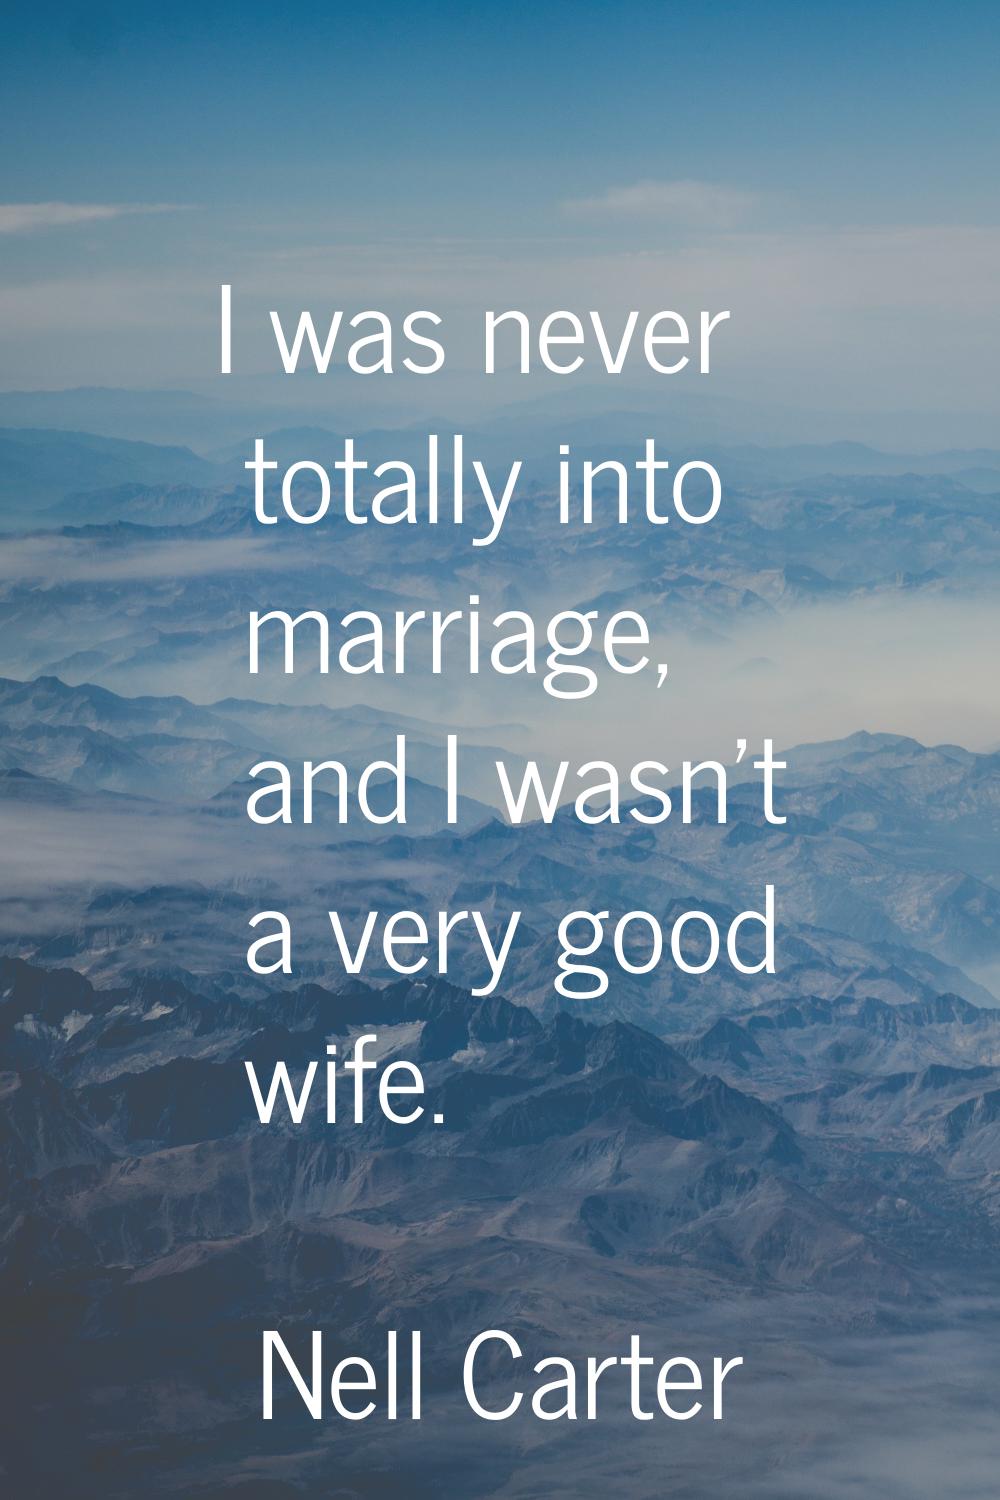 I was never totally into marriage, and I wasn't a very good wife.